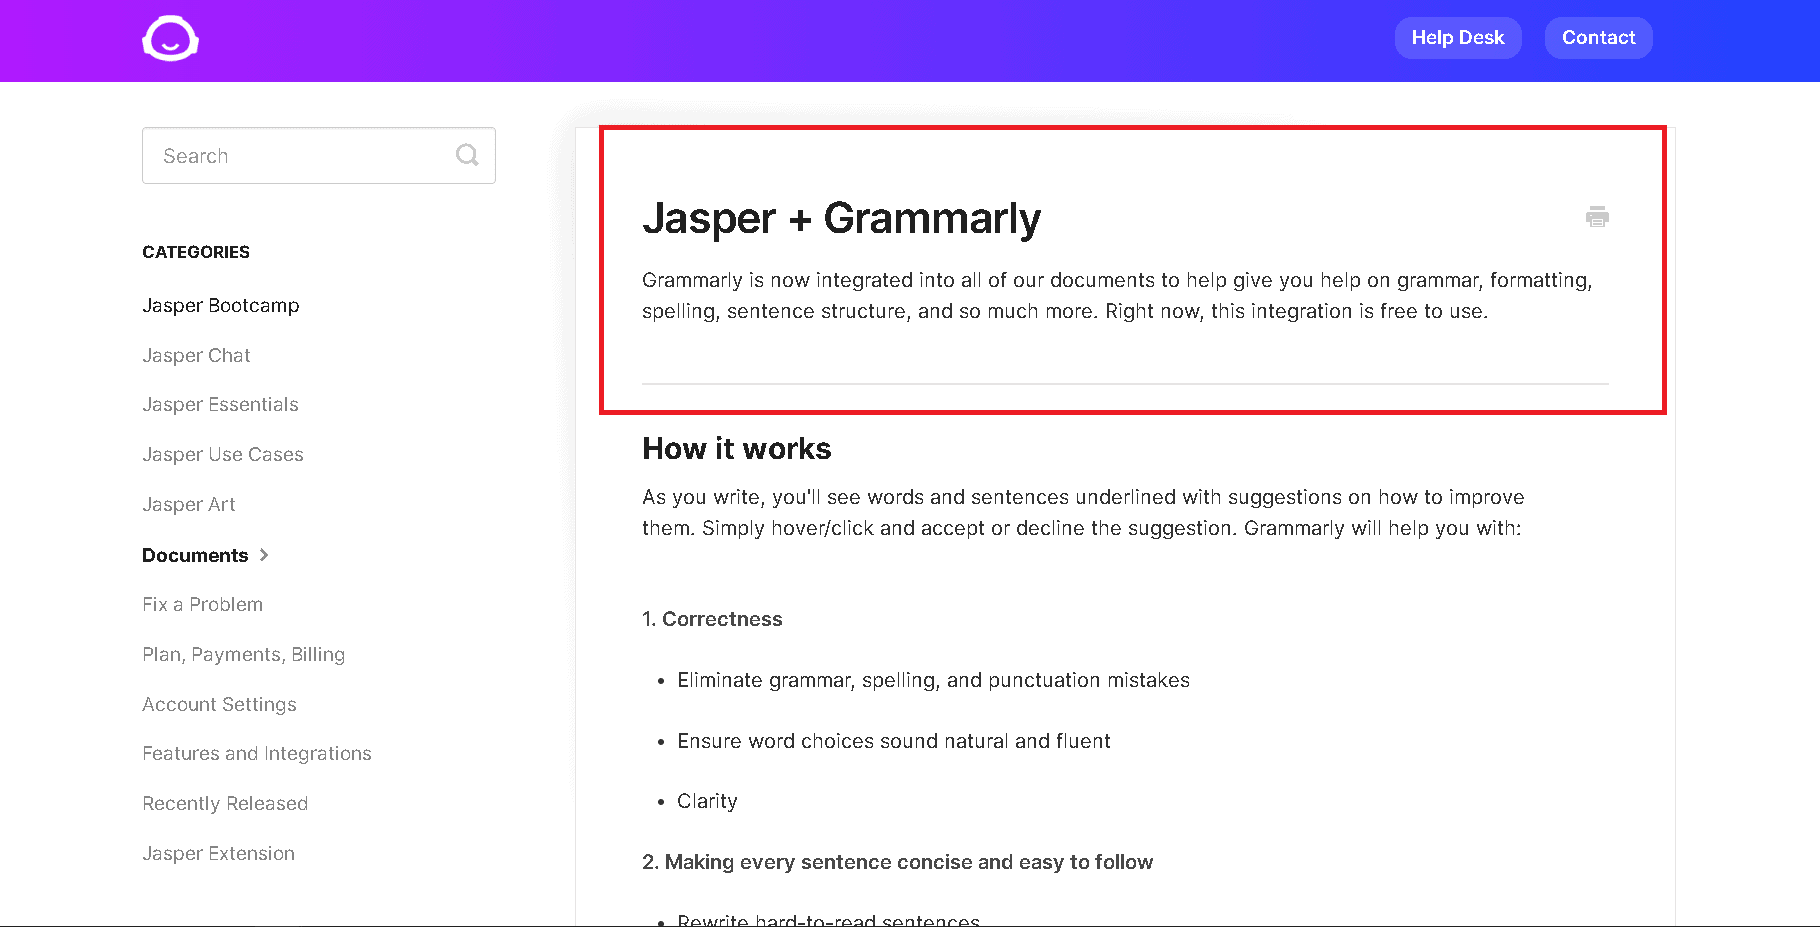 Grammarly is free to use with Jasper AI. No need for Grammarly's free trial when you have a subscription to Jasper AI.